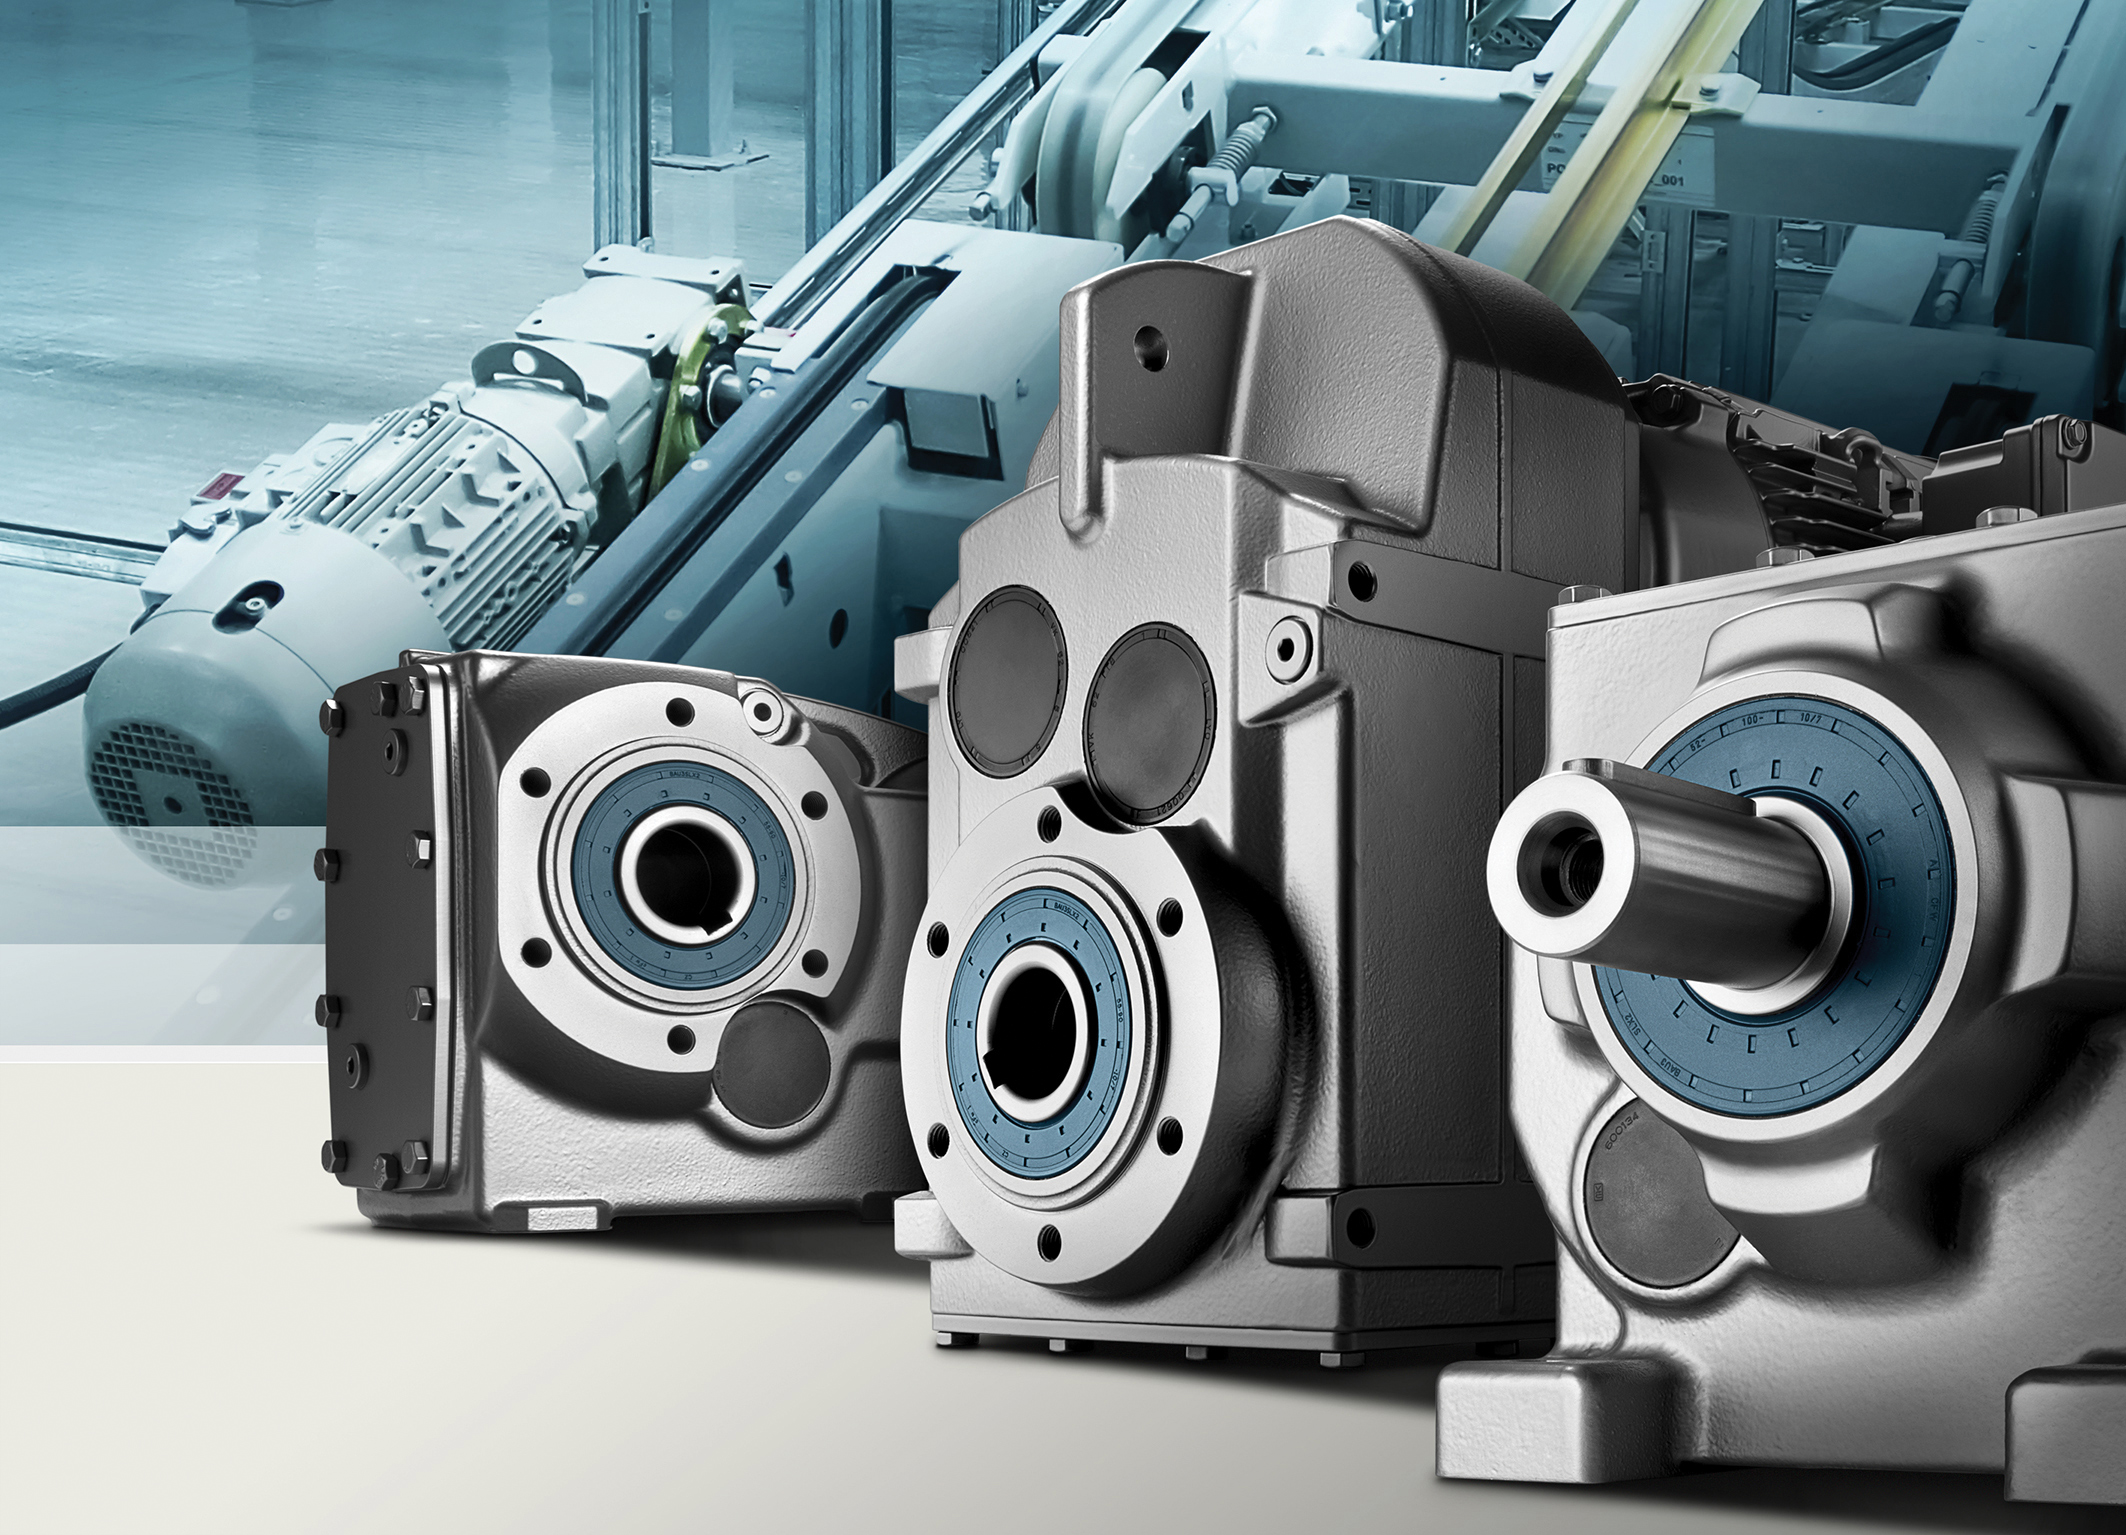 Gearmotors can be made with many different gear types. For instance, the Simogear gear motor series from Siemens features helical, parallel shaft and helical bevel gear unit types.